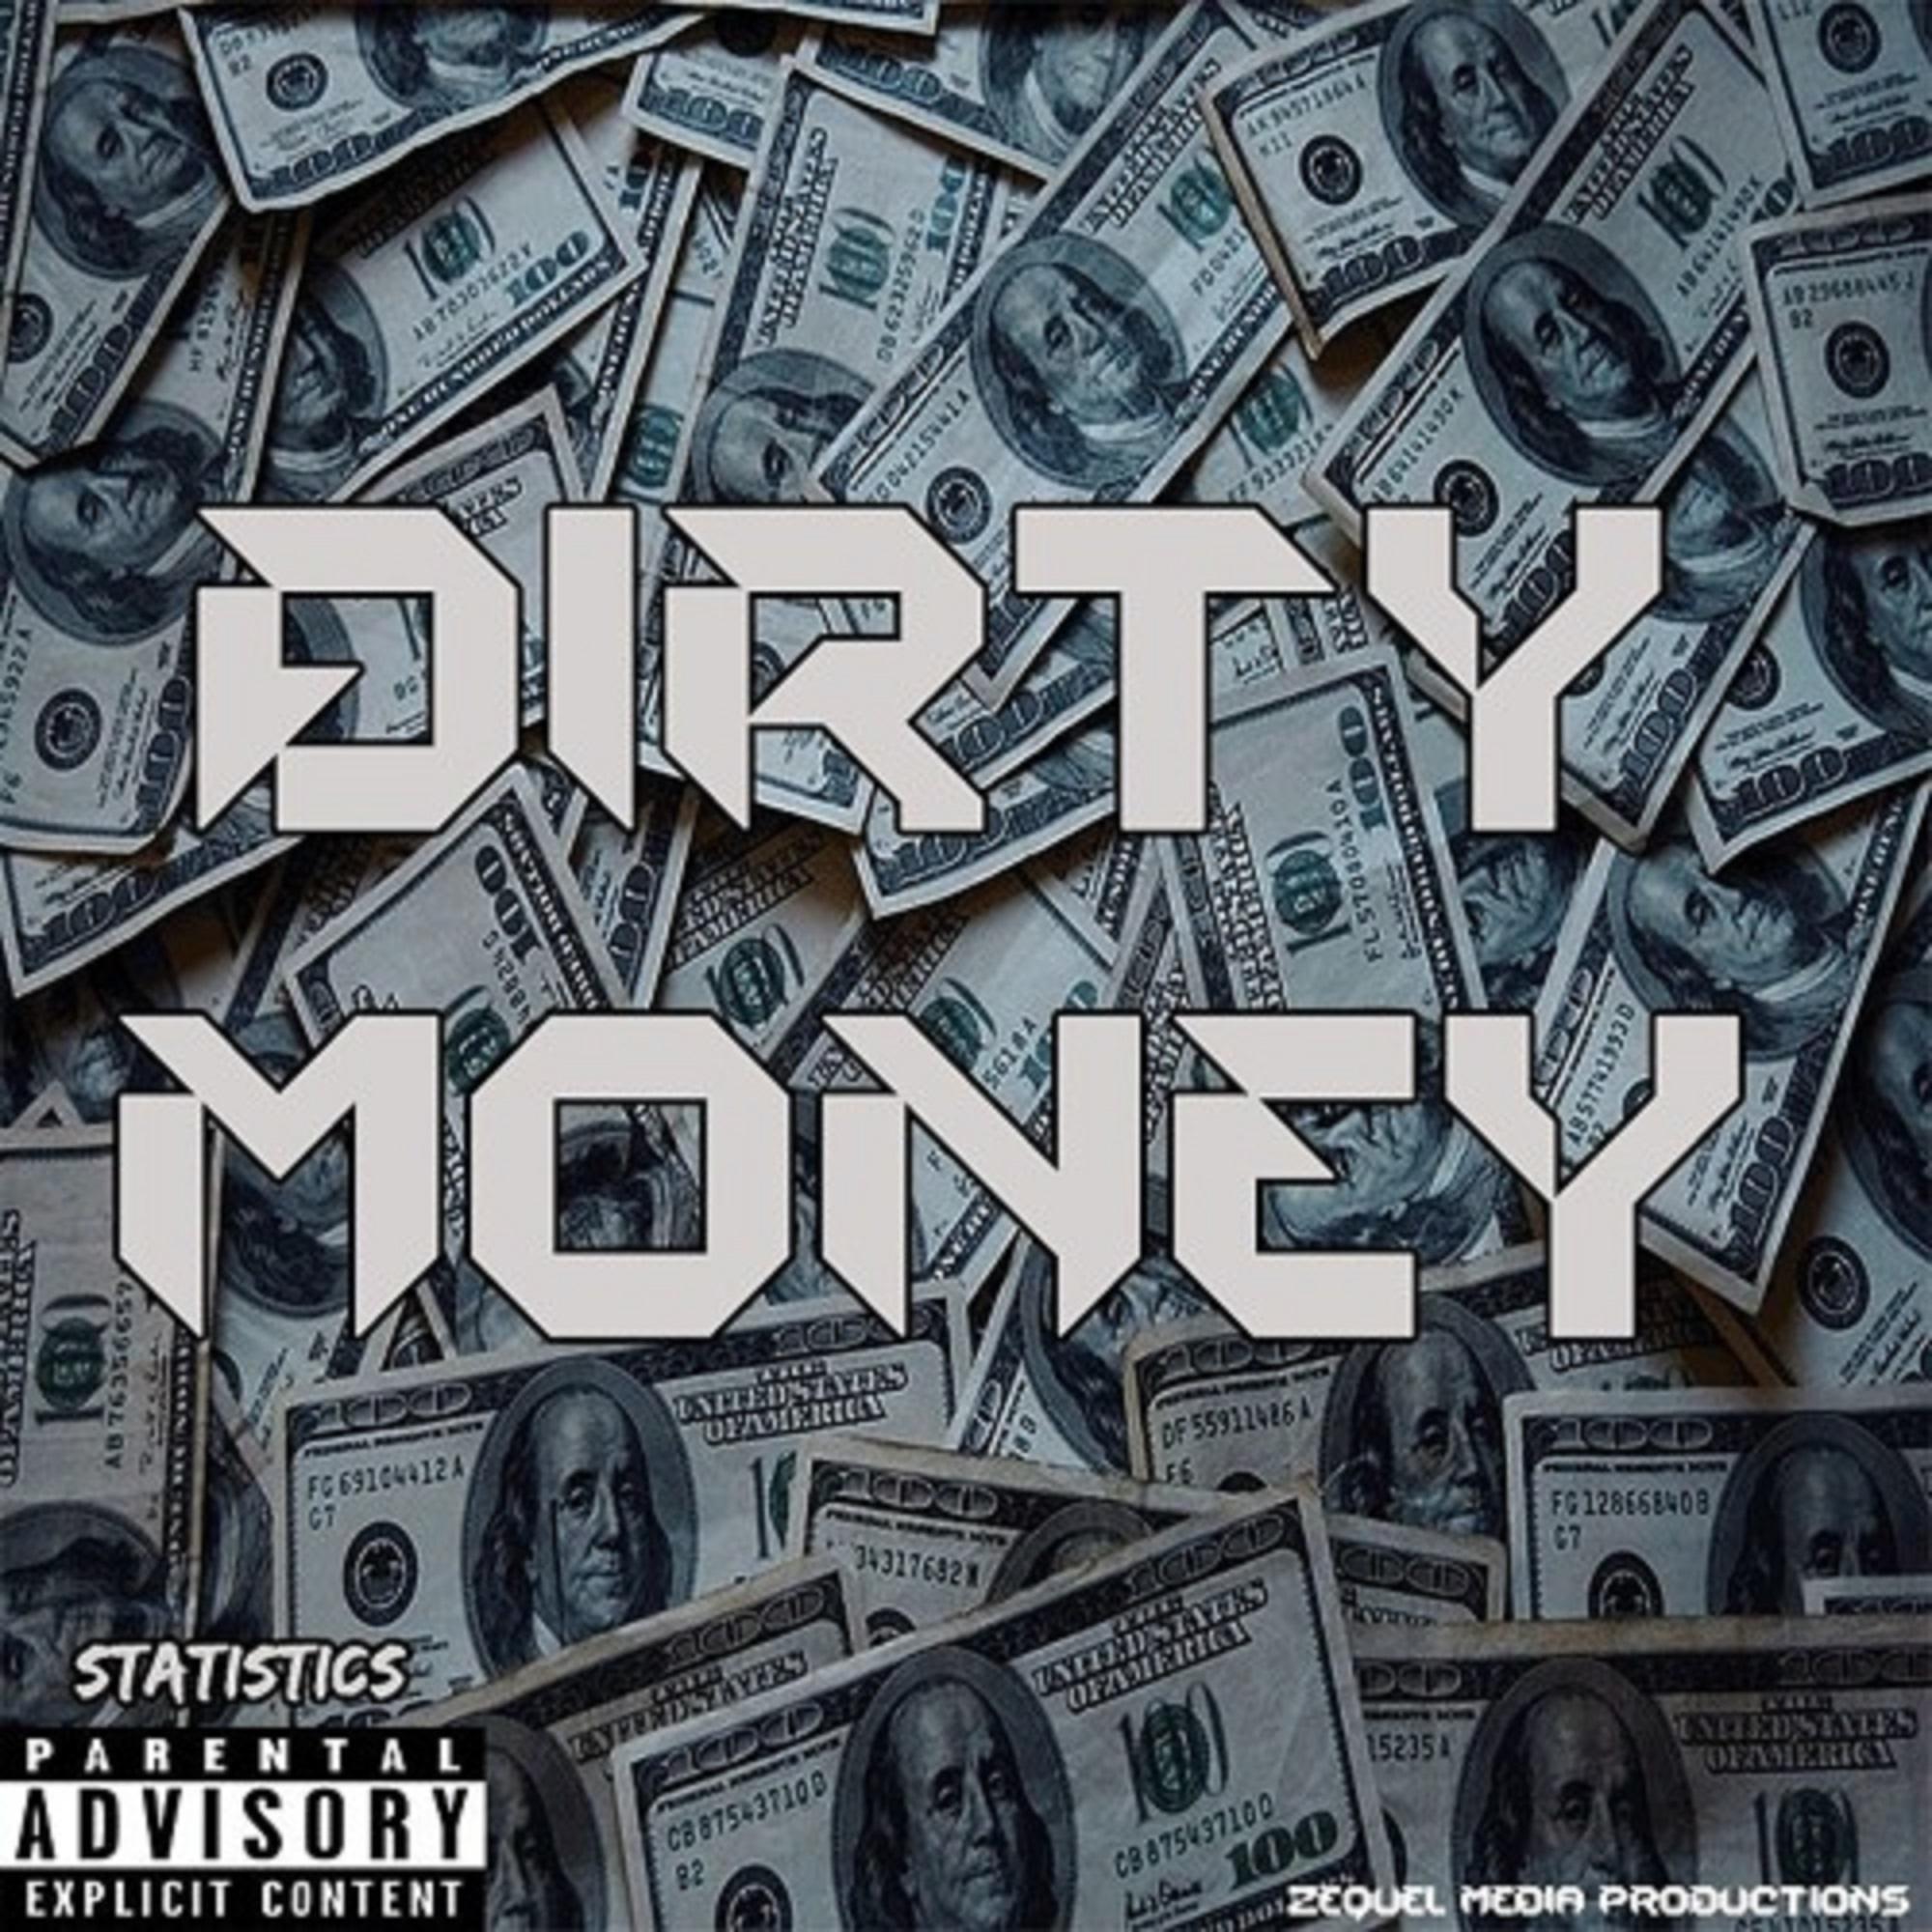 Dirty Money - this is real